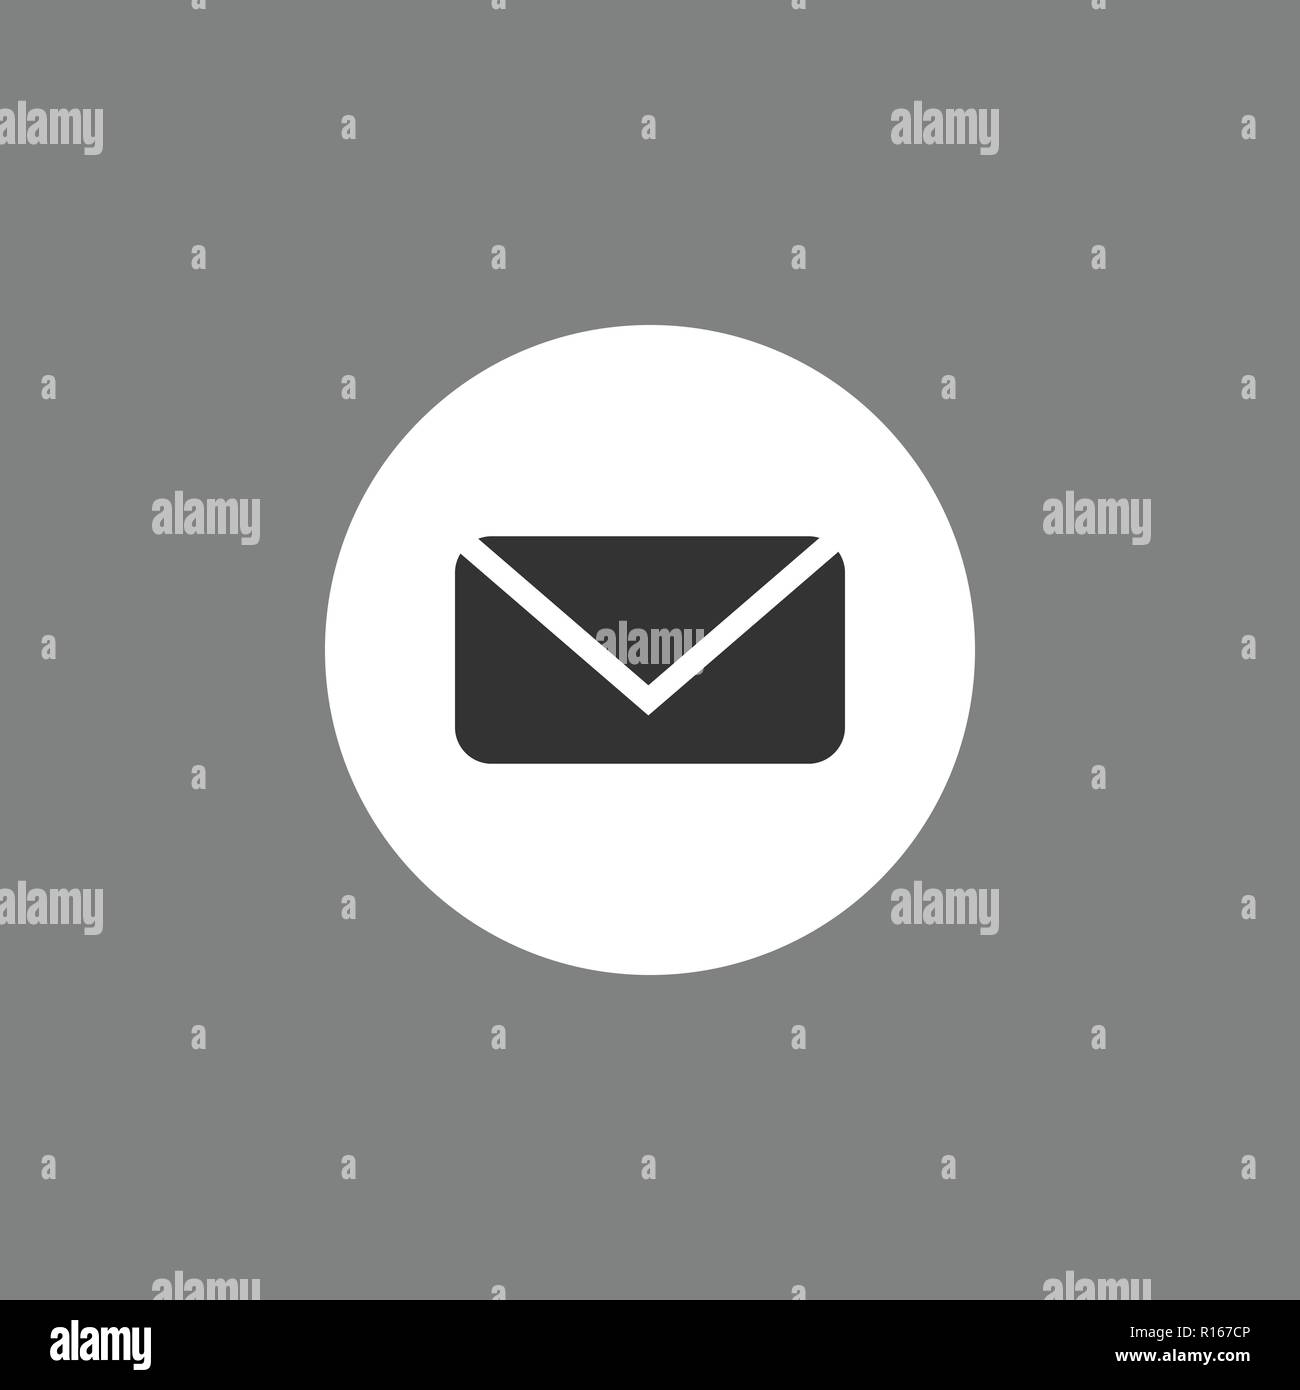 Message icon, email, letter sign, black on white gray background. Vector flat illustration. Stock Vector